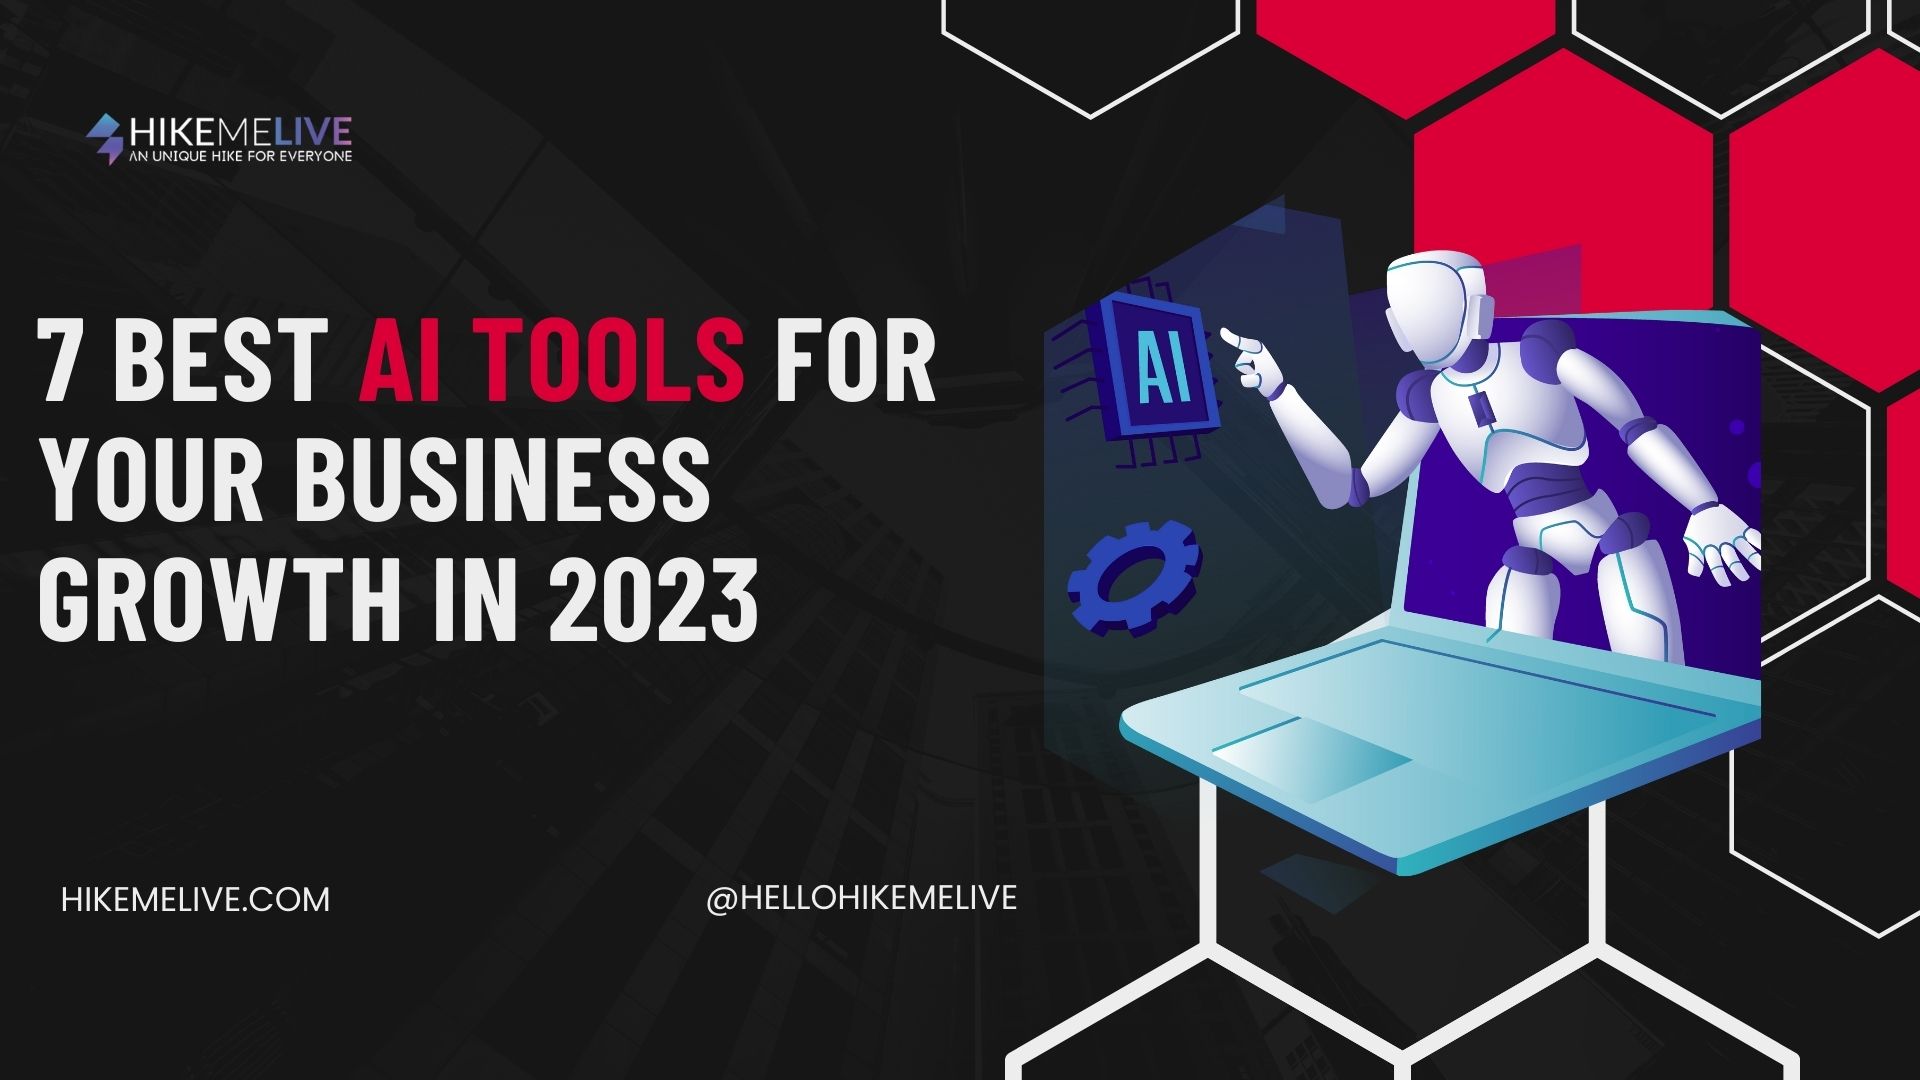 7 Best AI Tools for Your Business Growth in 2023